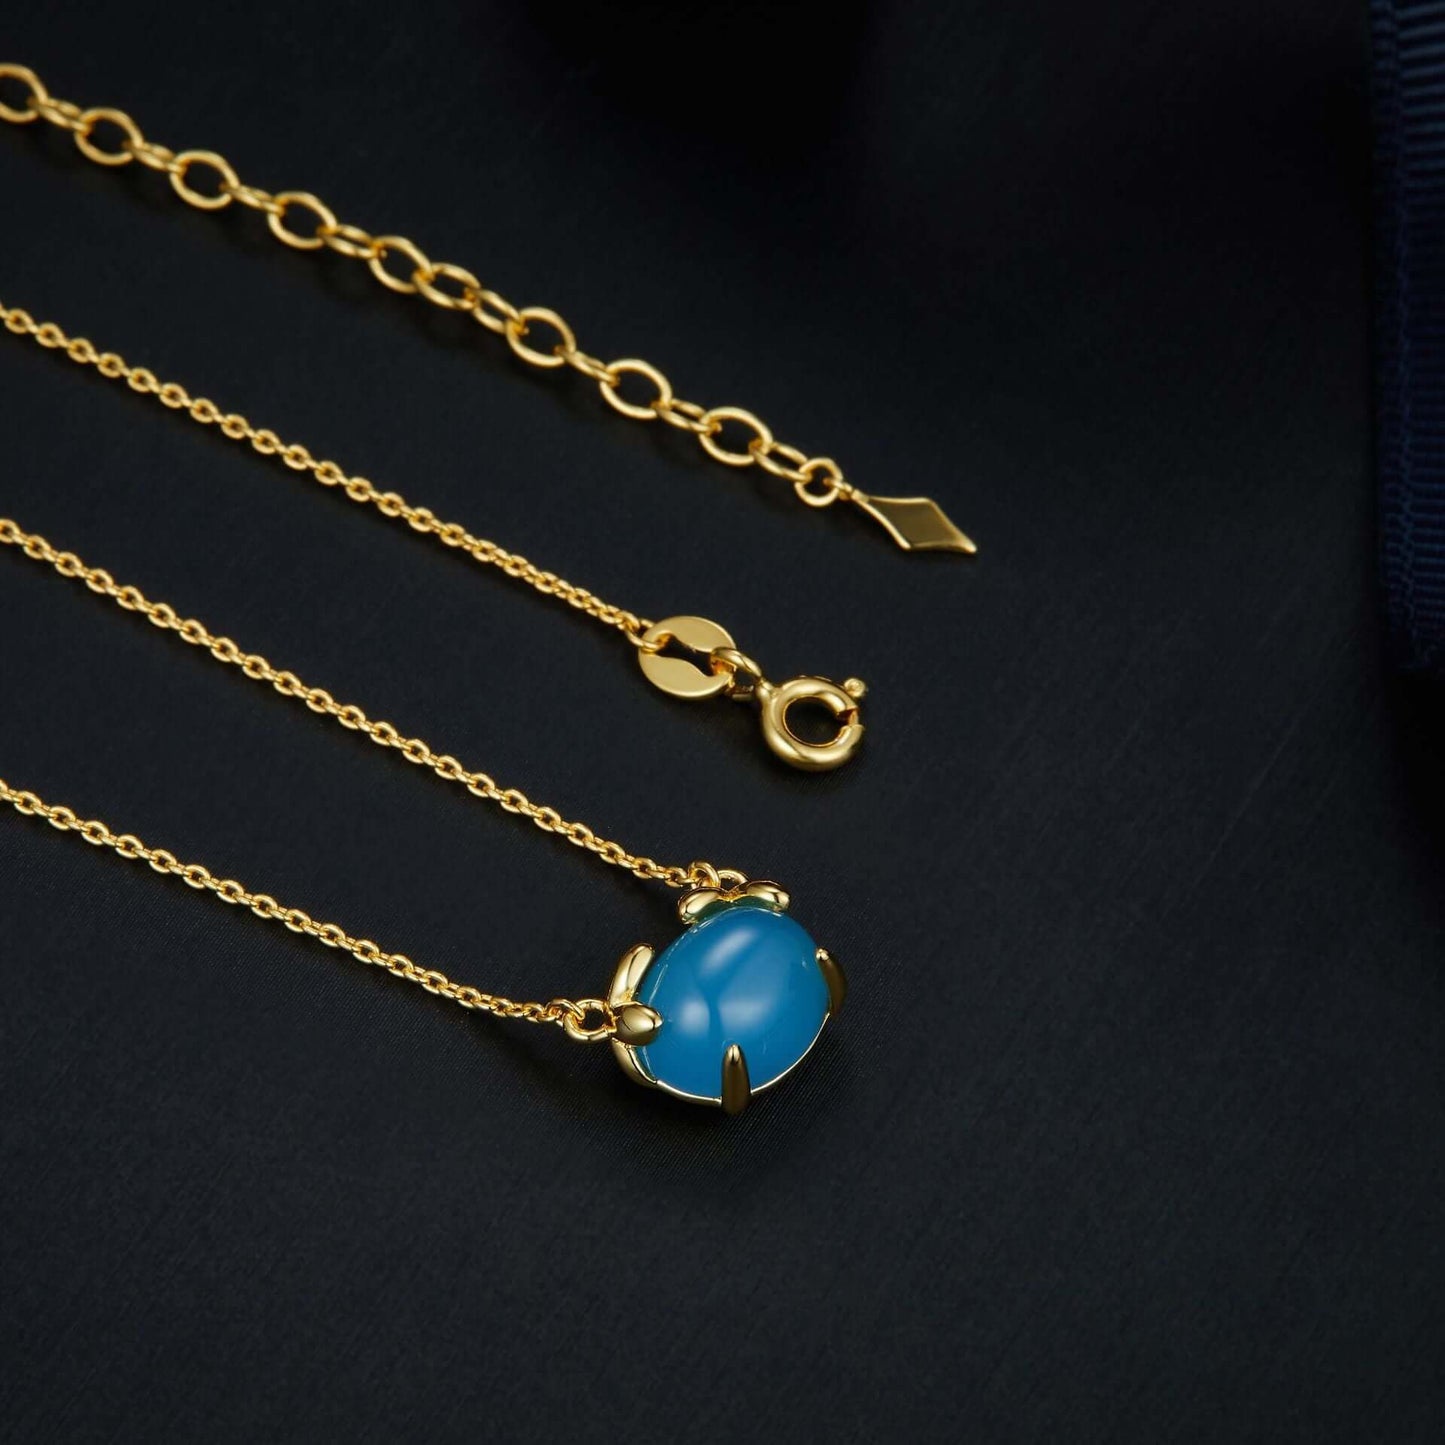 Oval Blue Agate Necklace